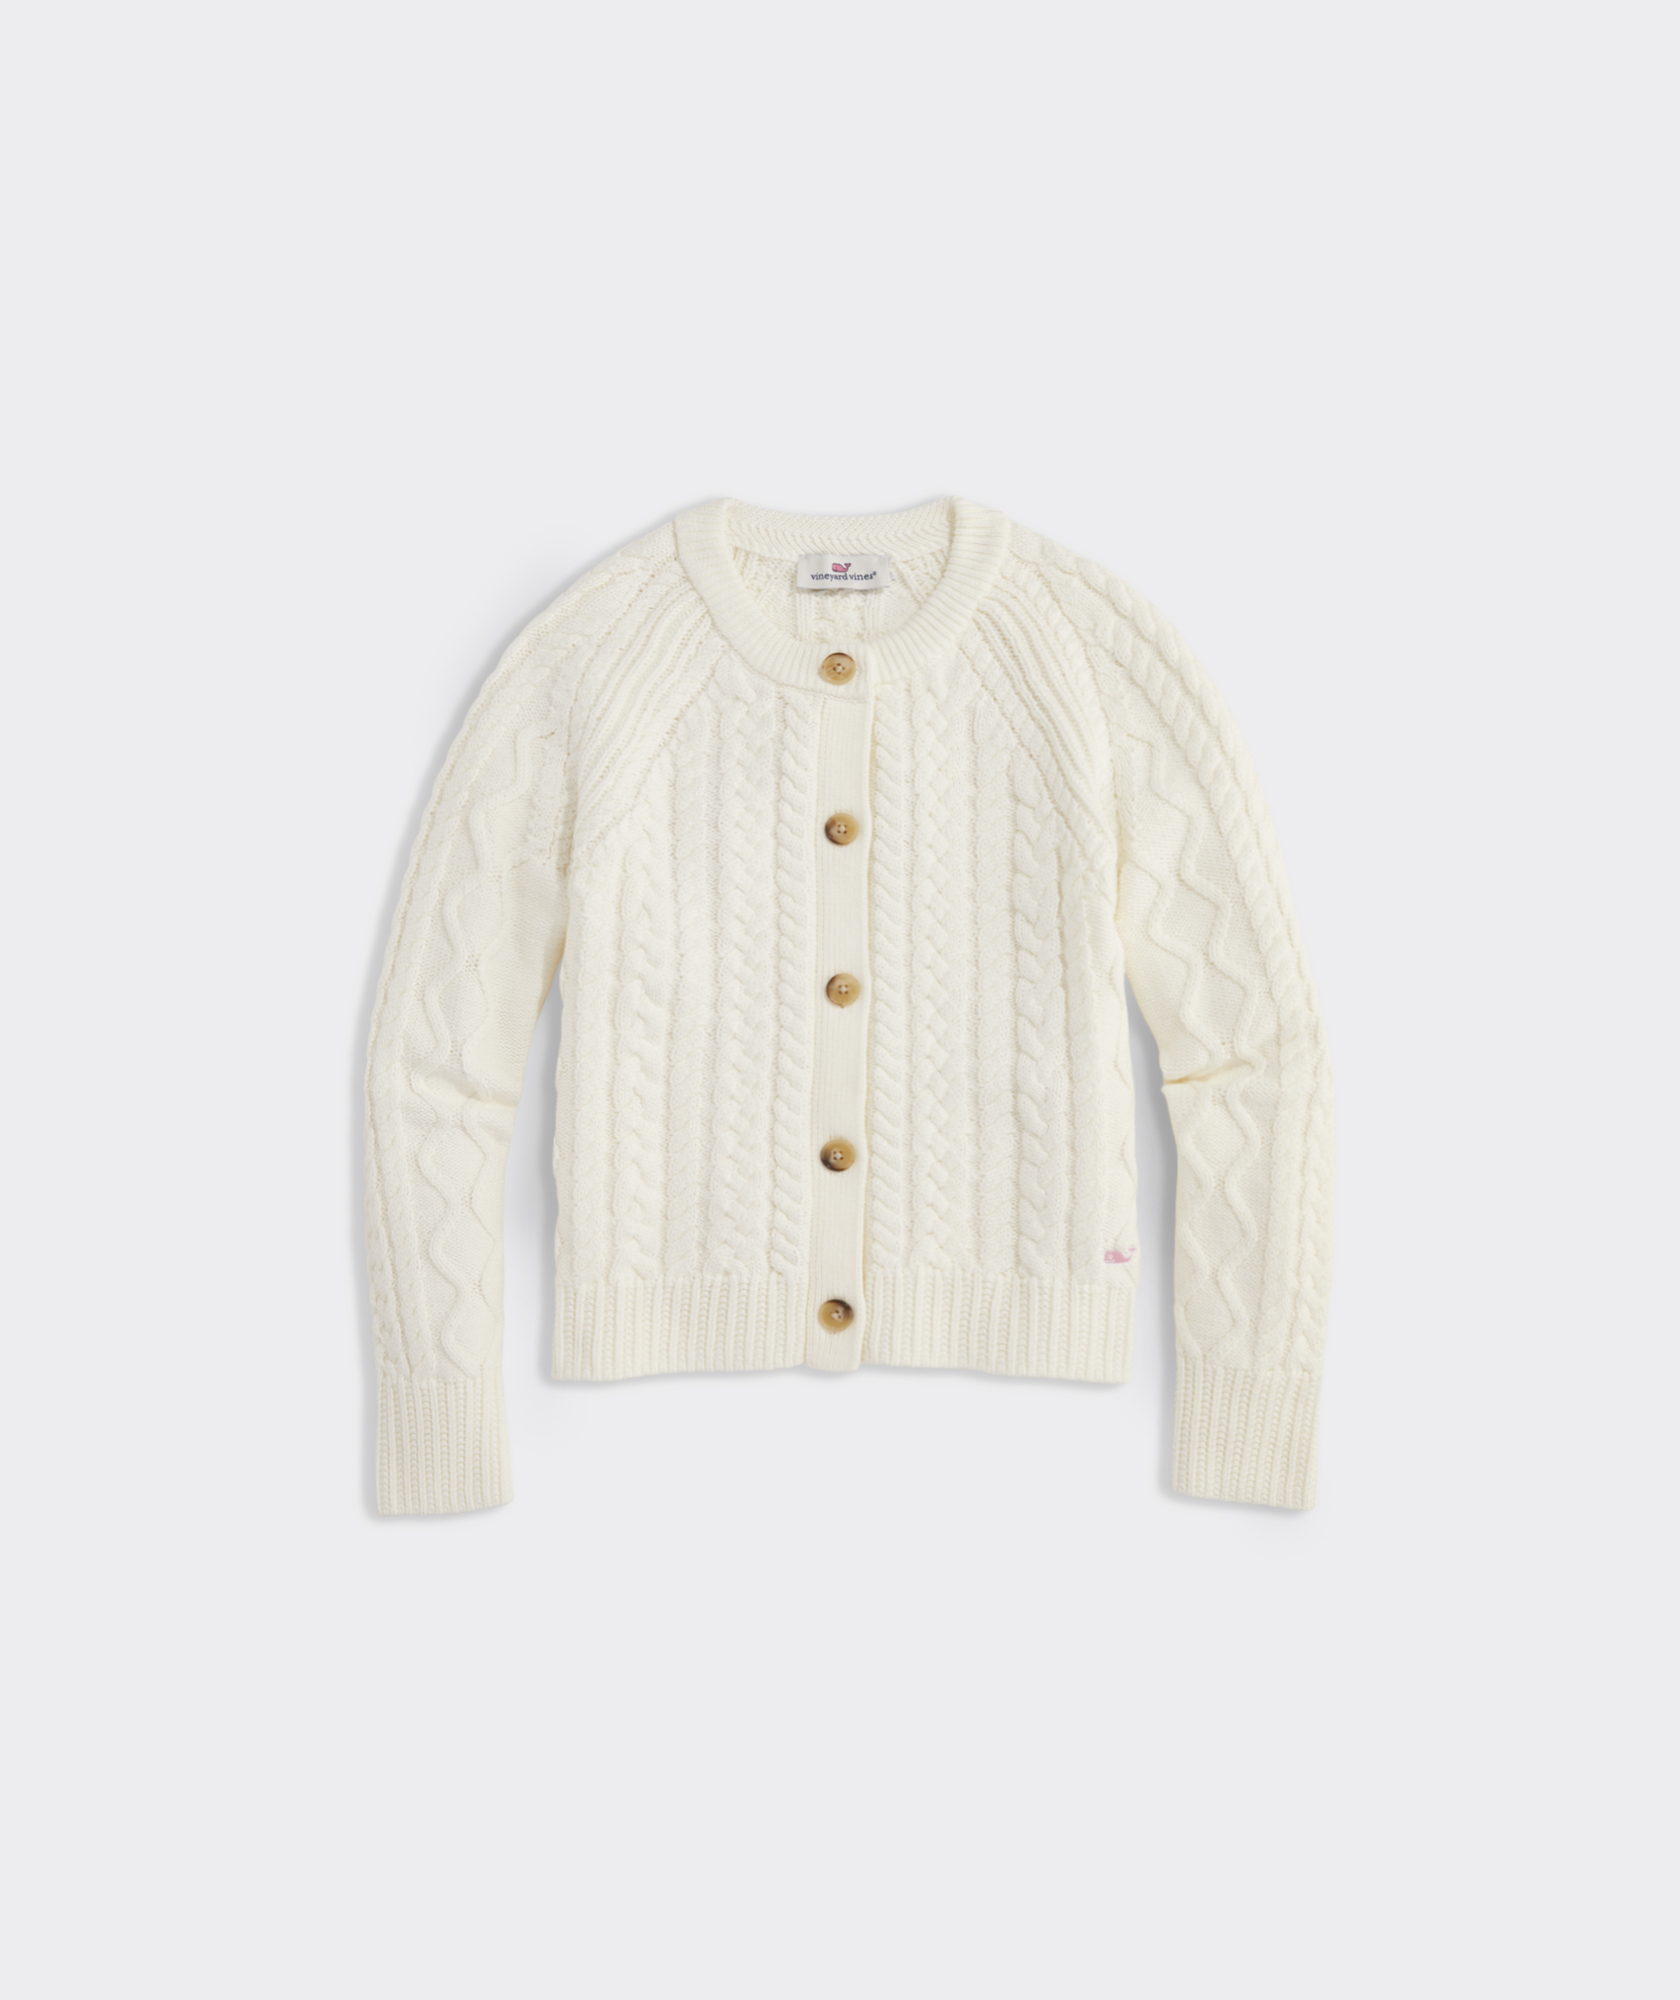 Girls Cream Cable Knit Cardigan